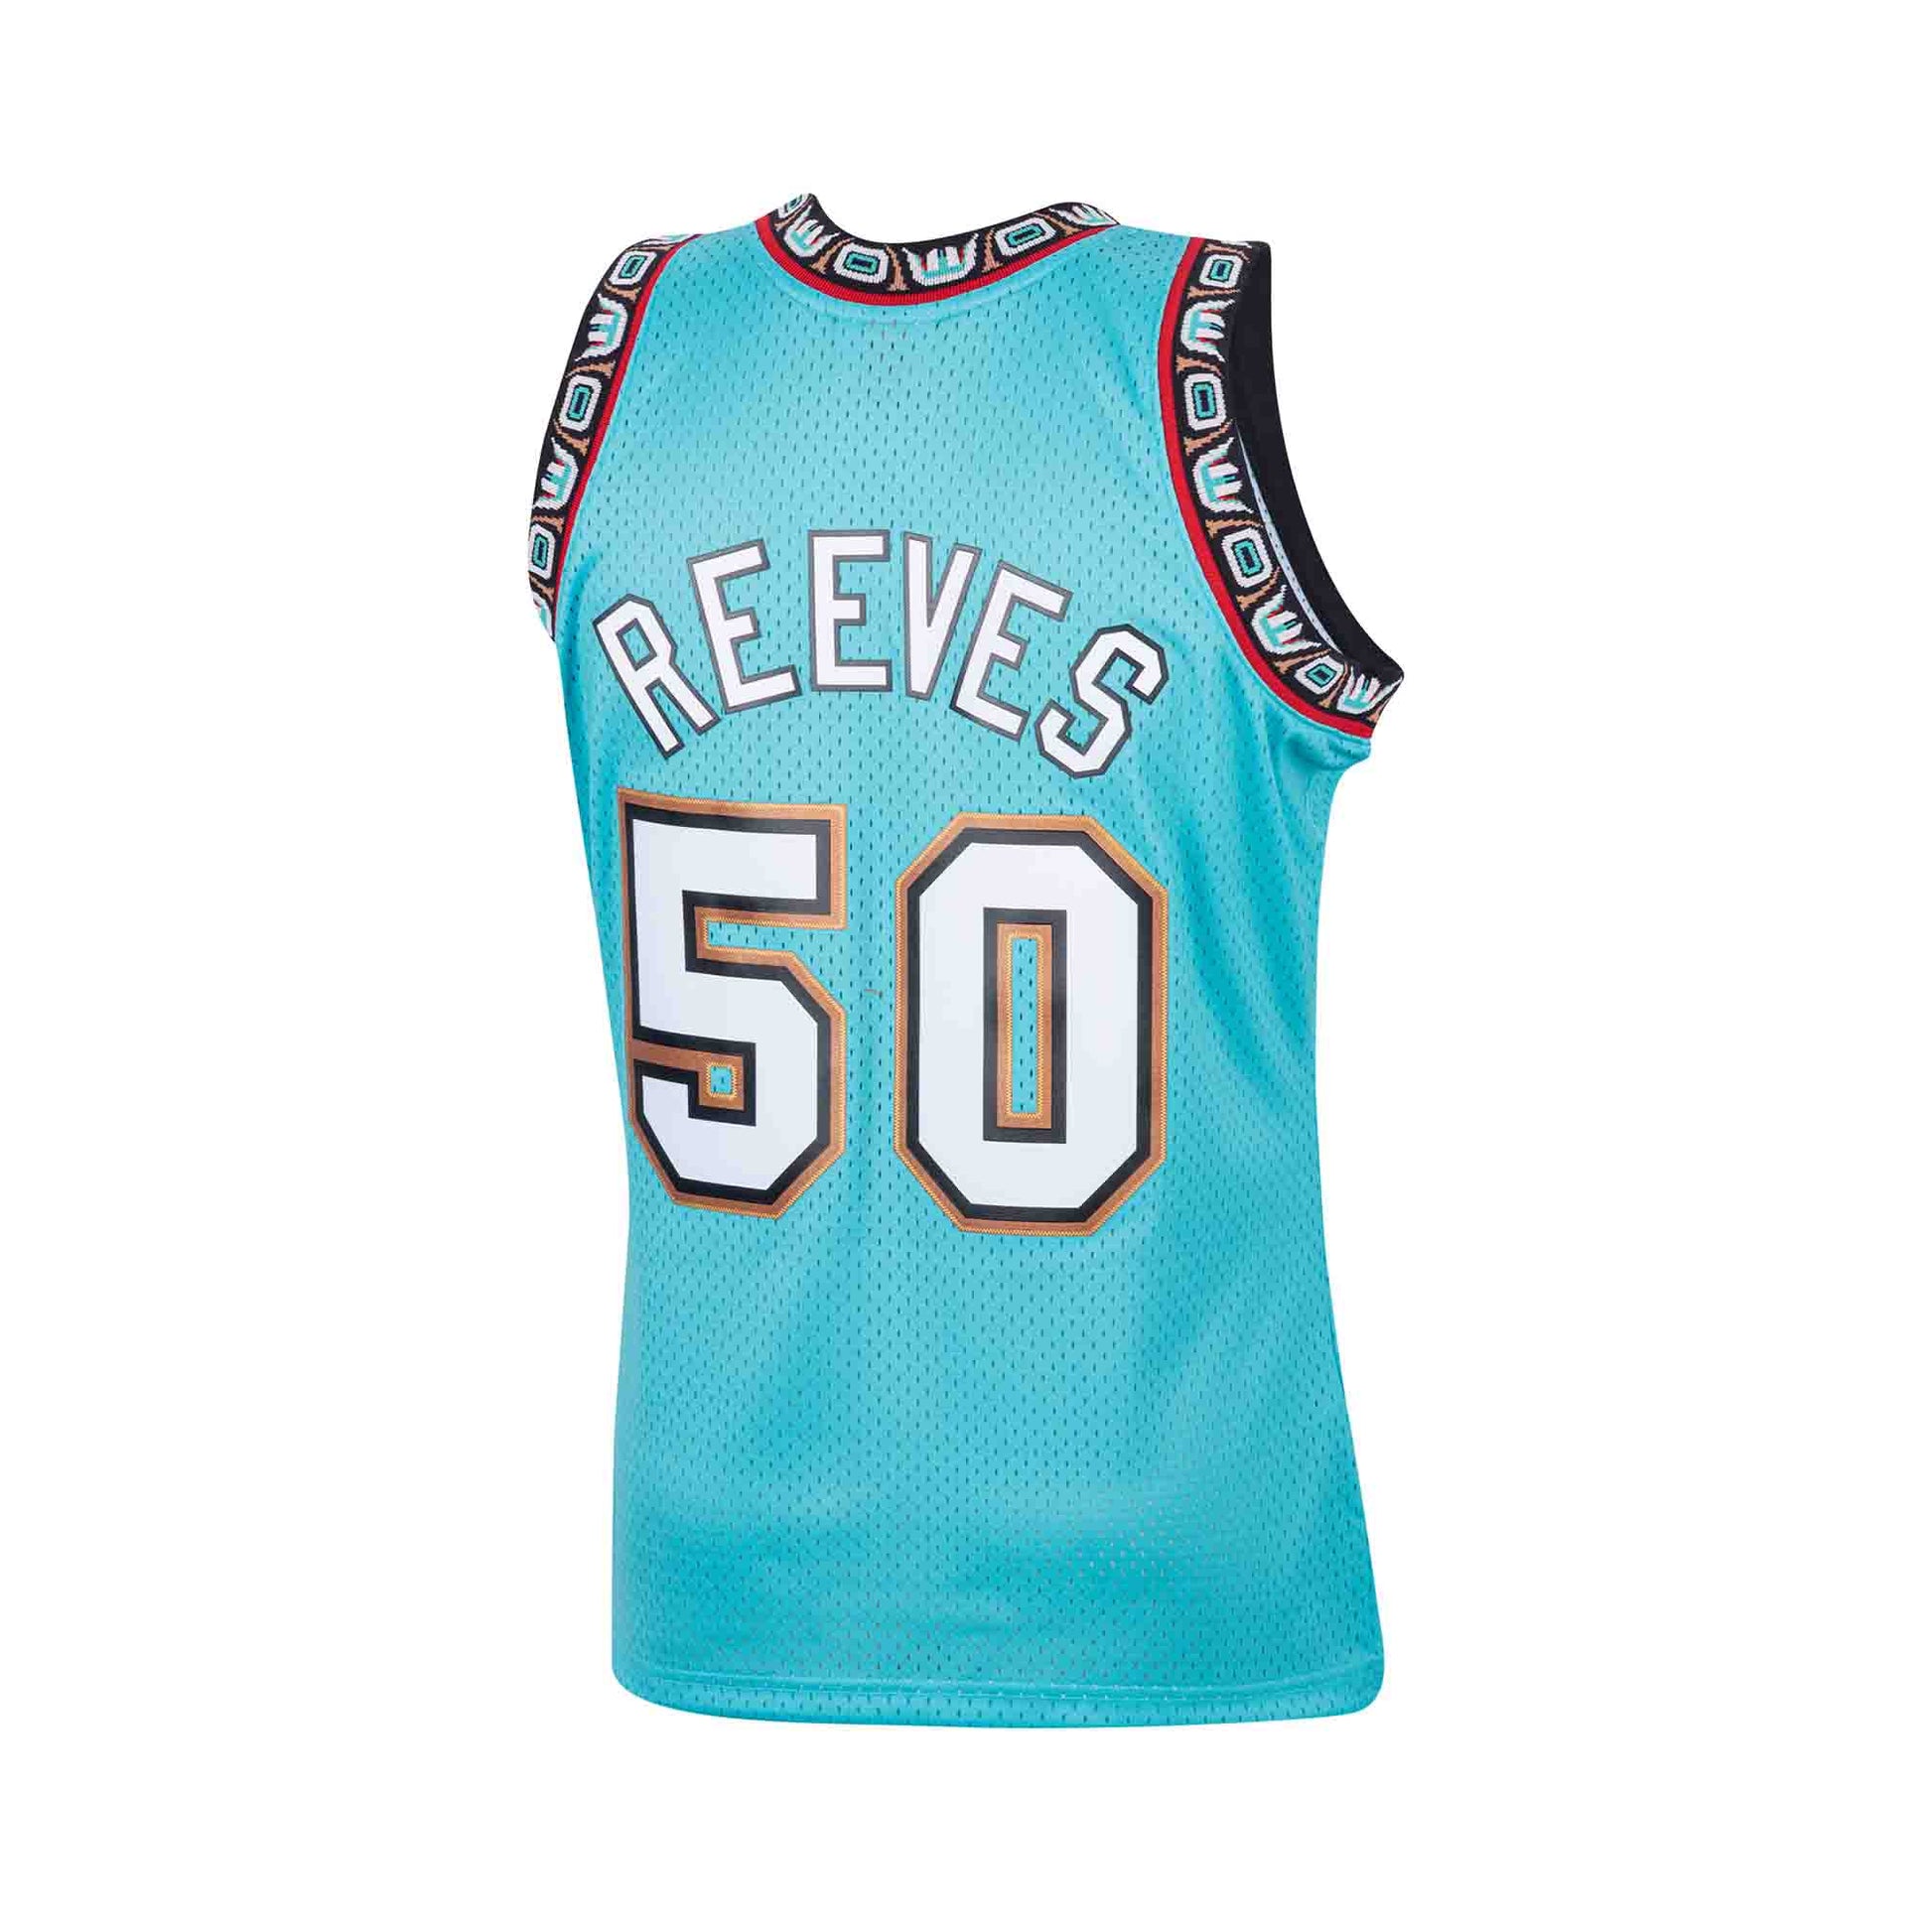 Men's Mitchell & Ness Red/Teal Vancouver Grizzlies 1996/97